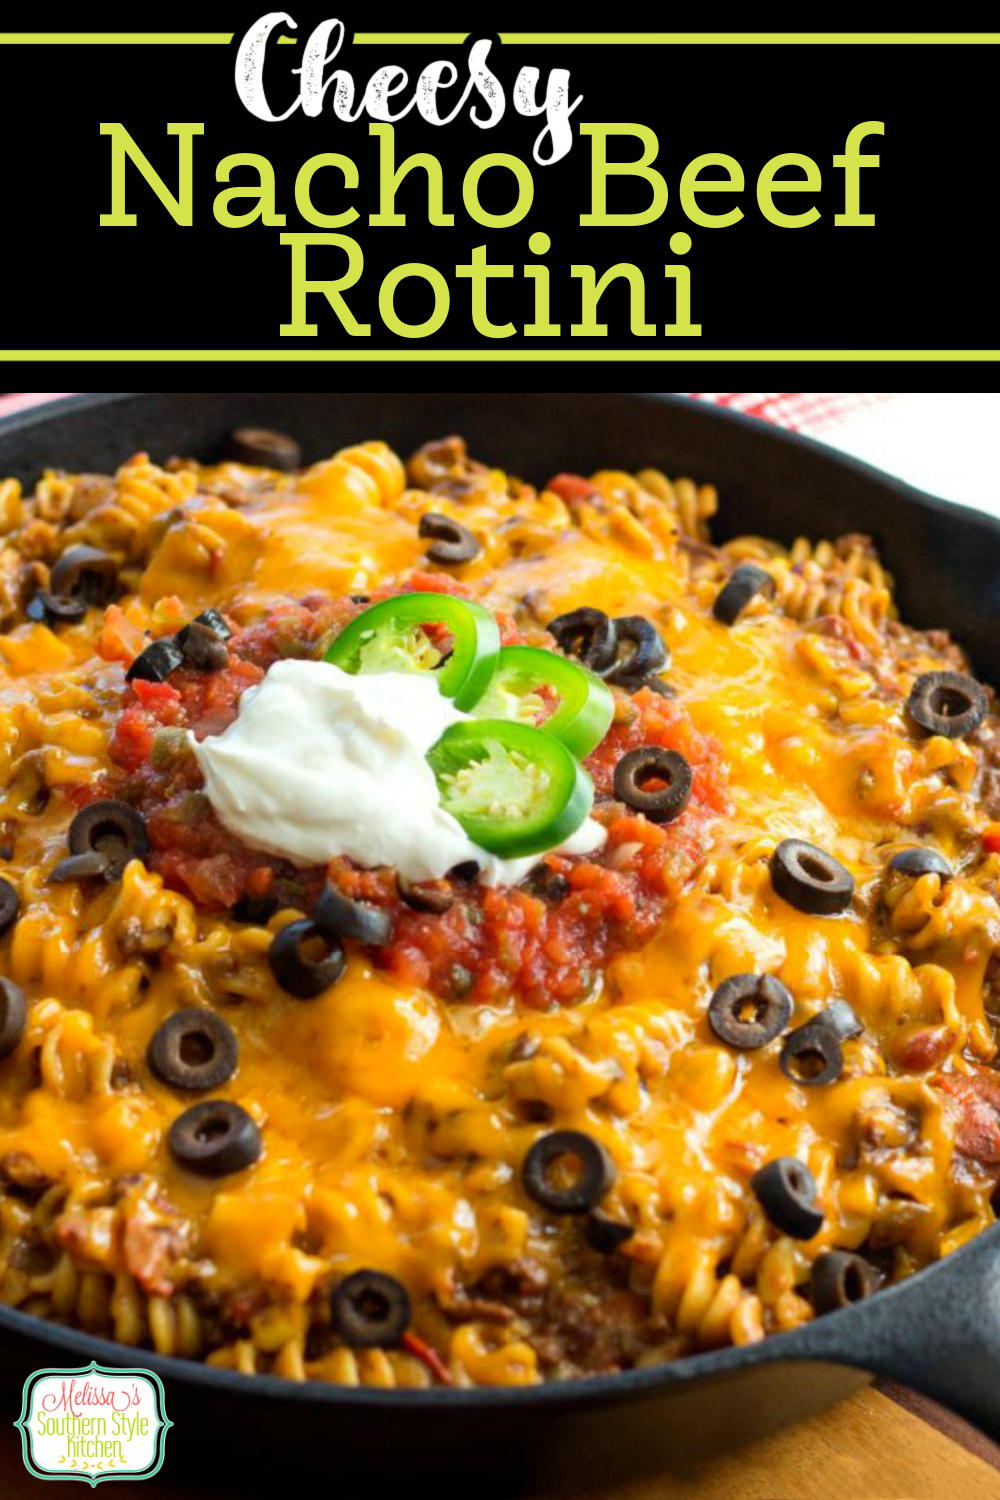 The family will love this Cheesy Nacho Beef Rotini for dinner any night of the week #nachos #nachobeef #cheesynachos #rotini #pasta #nachopastarecipes #dinner #easygroundbeefrecipes #beef #dinnerideas #tacotuewsday #southernfood #southernrecipes #castironcooking via @melissasssk